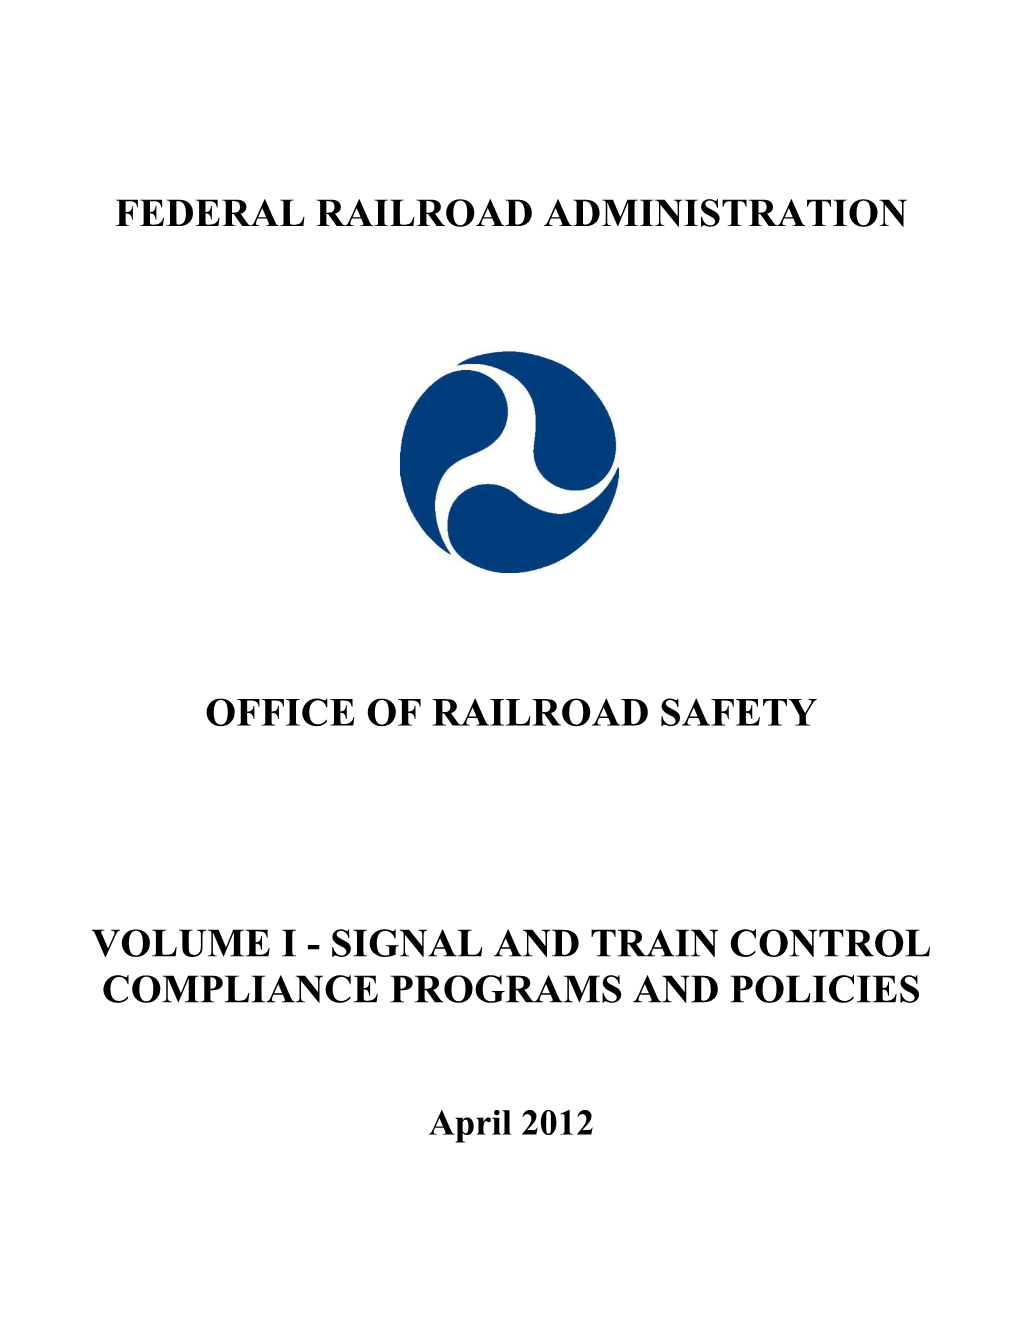 Signal and Train Control Compliance Programs and Policies